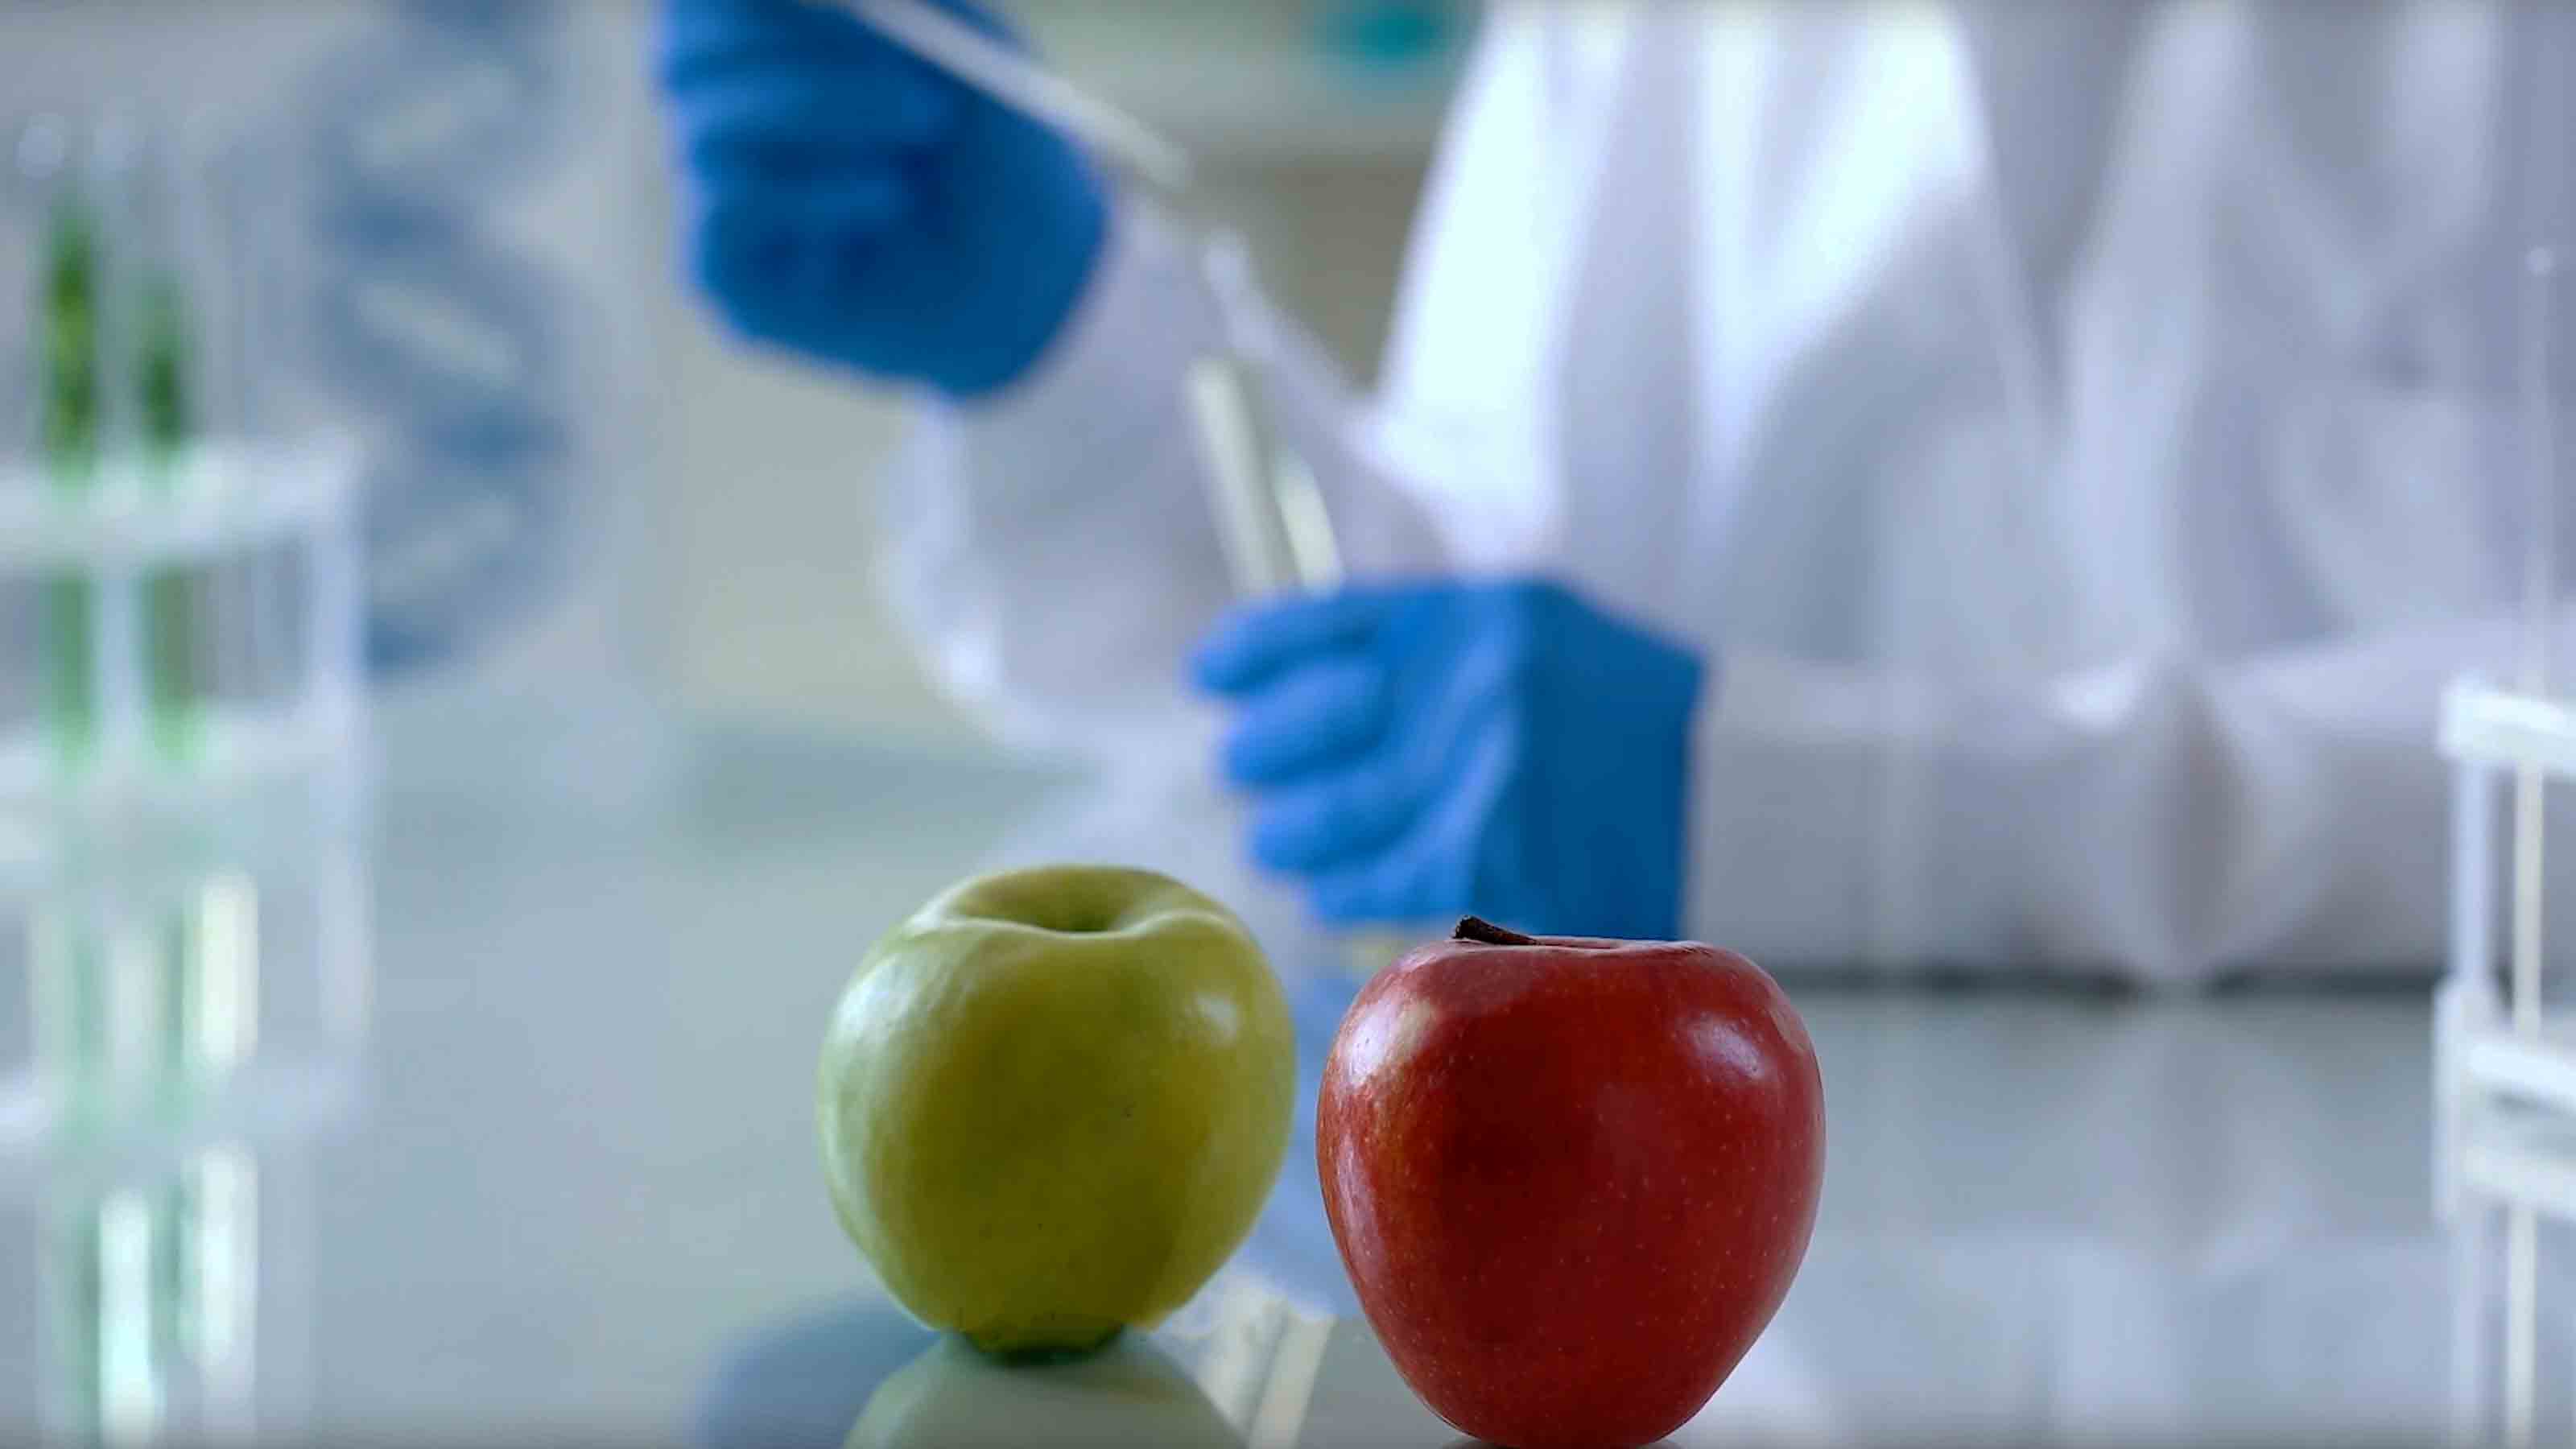 Apples in the laboratory